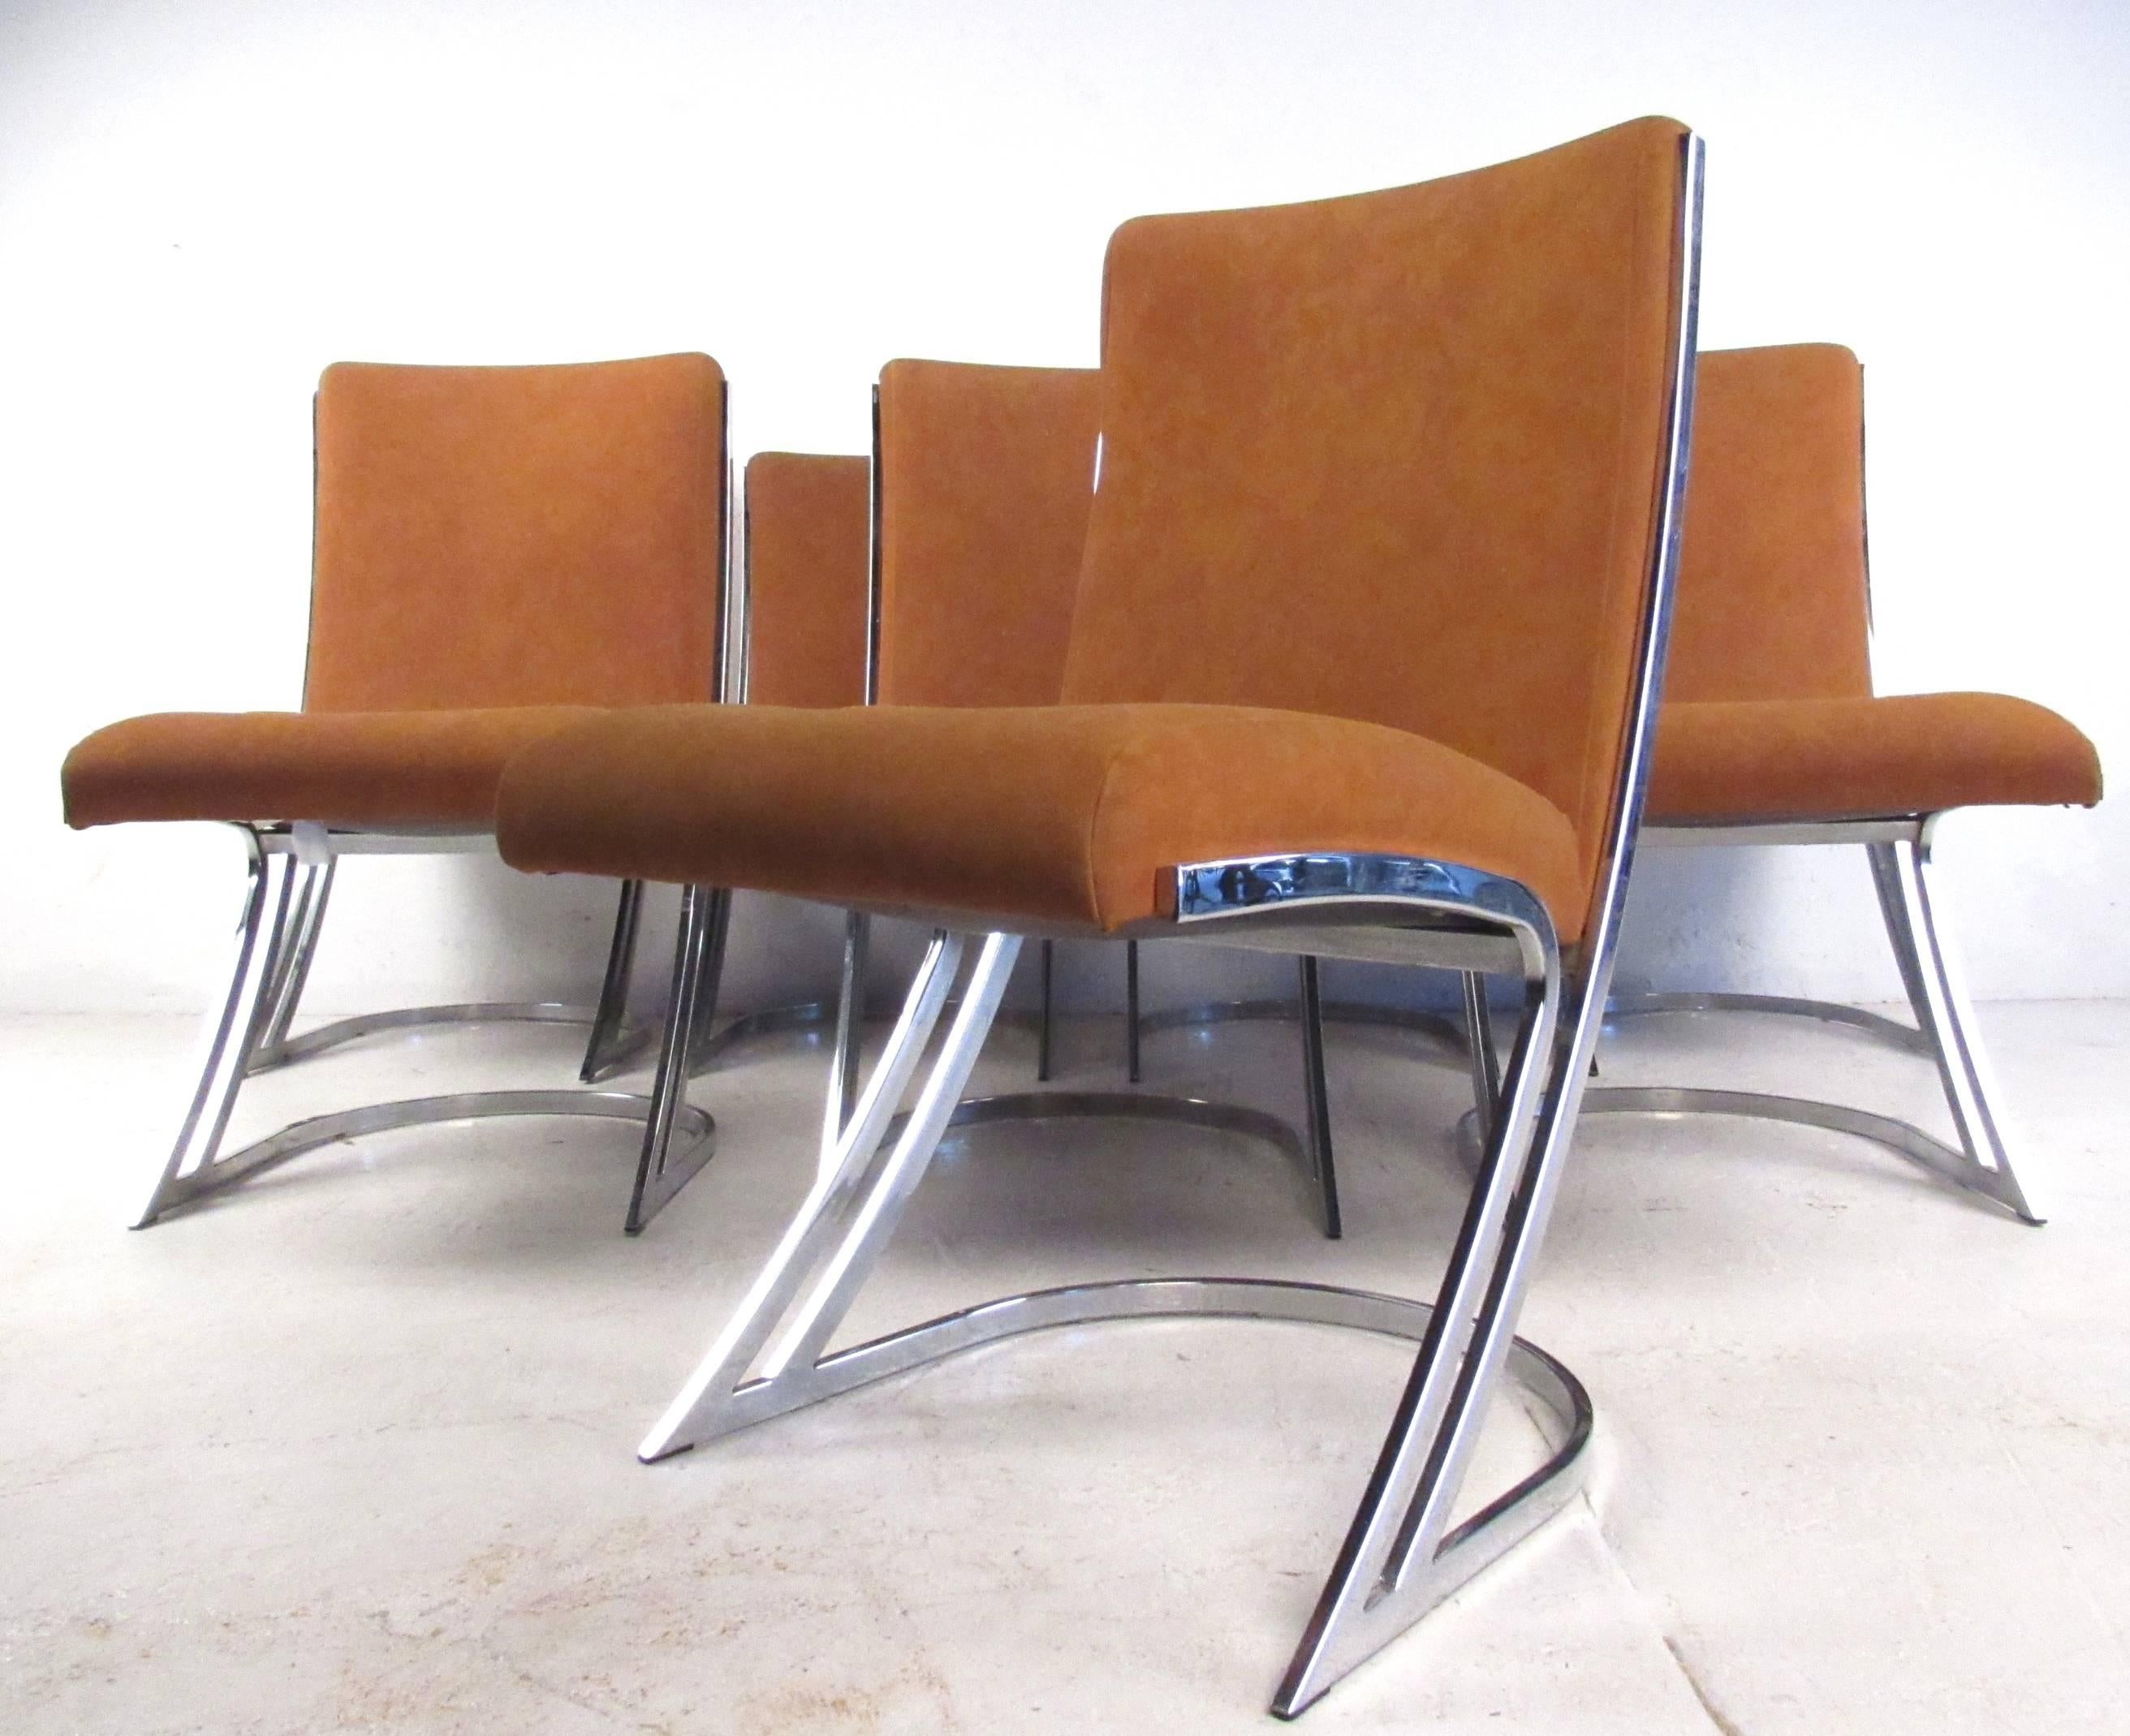 This stunning set of Mid-Century style dining chairs feature a Z-like cantilever base in a stylish chrome finish. Unique covering and comfortable upholstery make this the perfect set for any modern interior. Please confirm item location (NY or NJ).